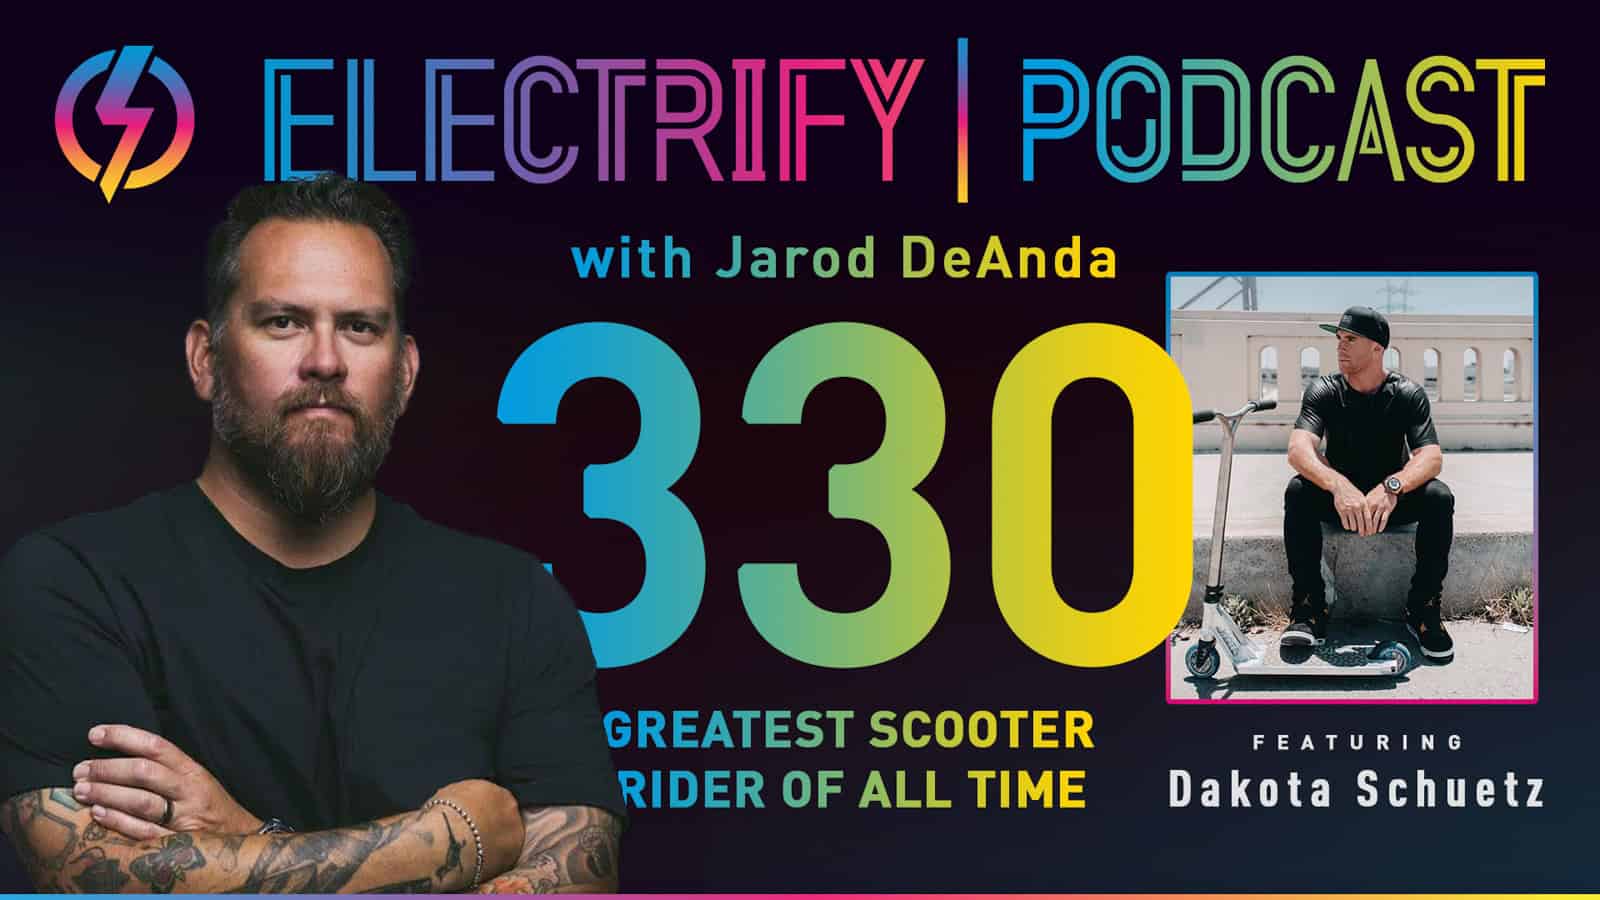 Electrify Podcast episode 330 with host Jarod DeAnda and guest Dakota Schuetz, the Greatest Scooter Rider of All Time